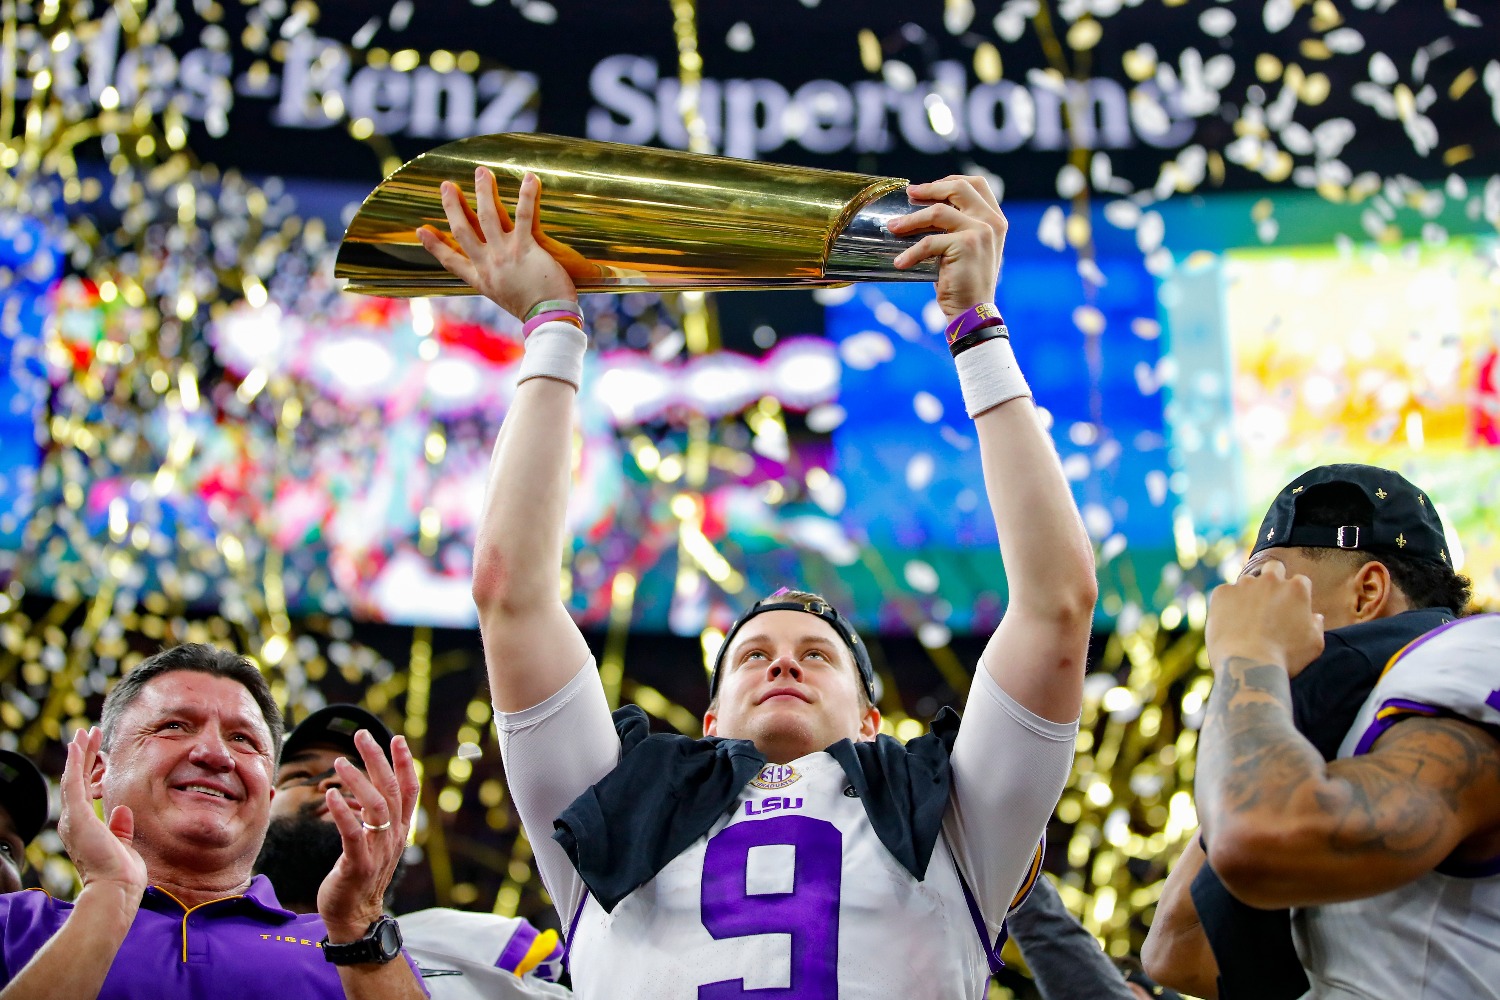 Joe Burrow will copy Rob Gronkowski after signing his $36 million Bengals contract.